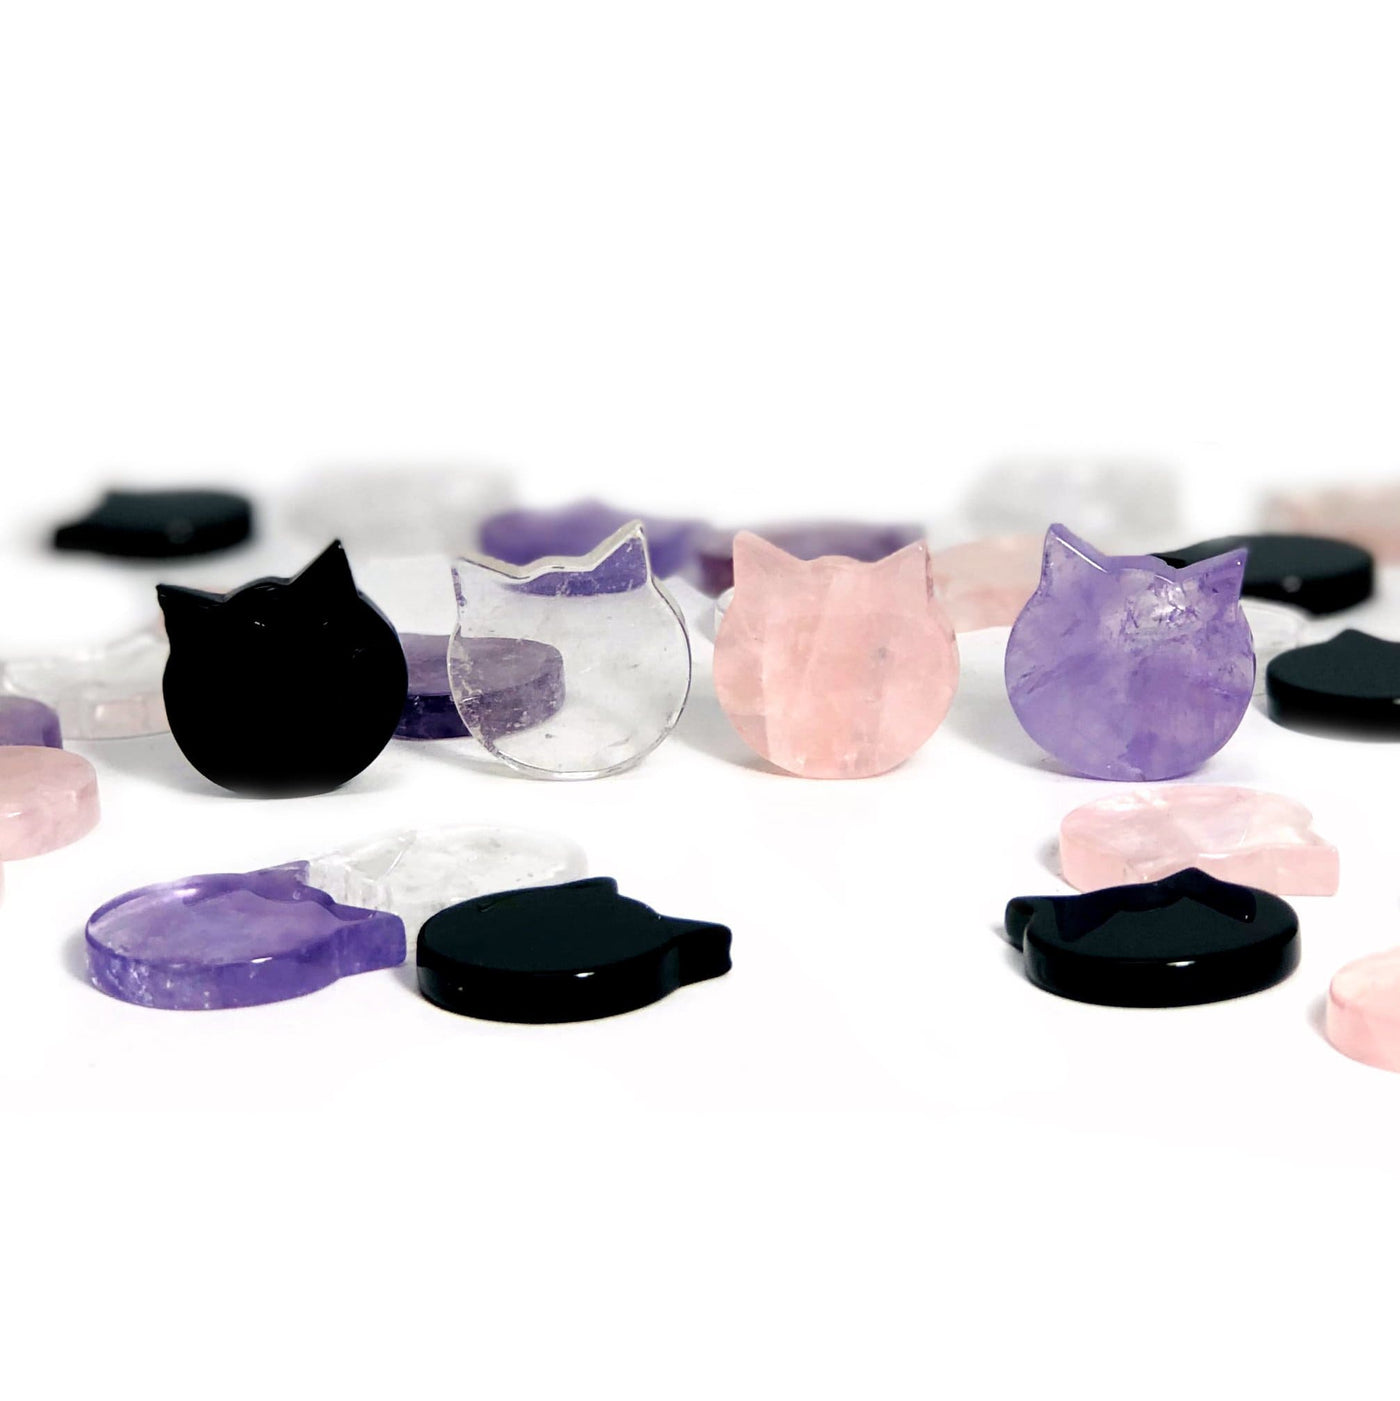 Gemstone Cats in obsidian. crystal quartz, rose quartz, and amethyst with others in the background